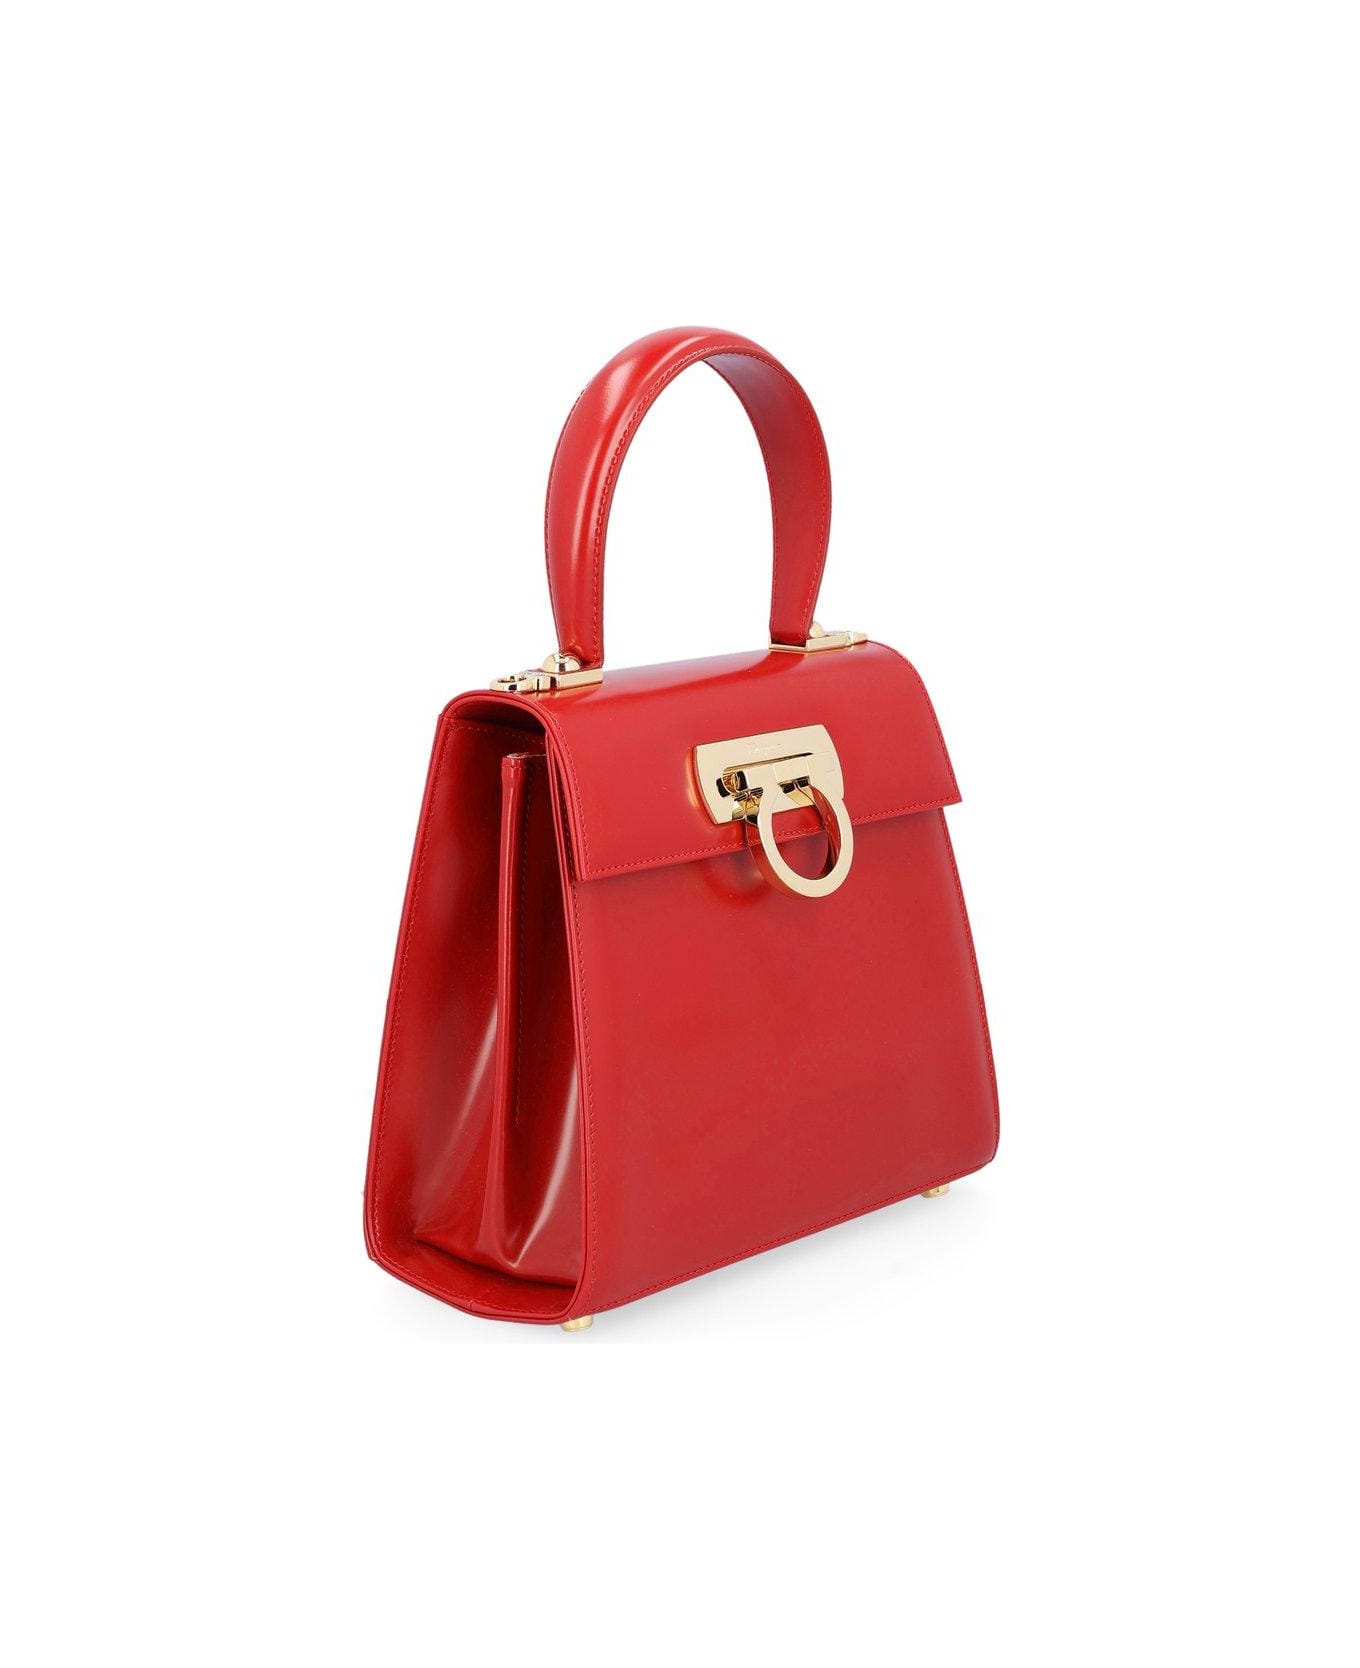 Ferragamo Iconic Small Top Handle Bags - Red トートバッグ